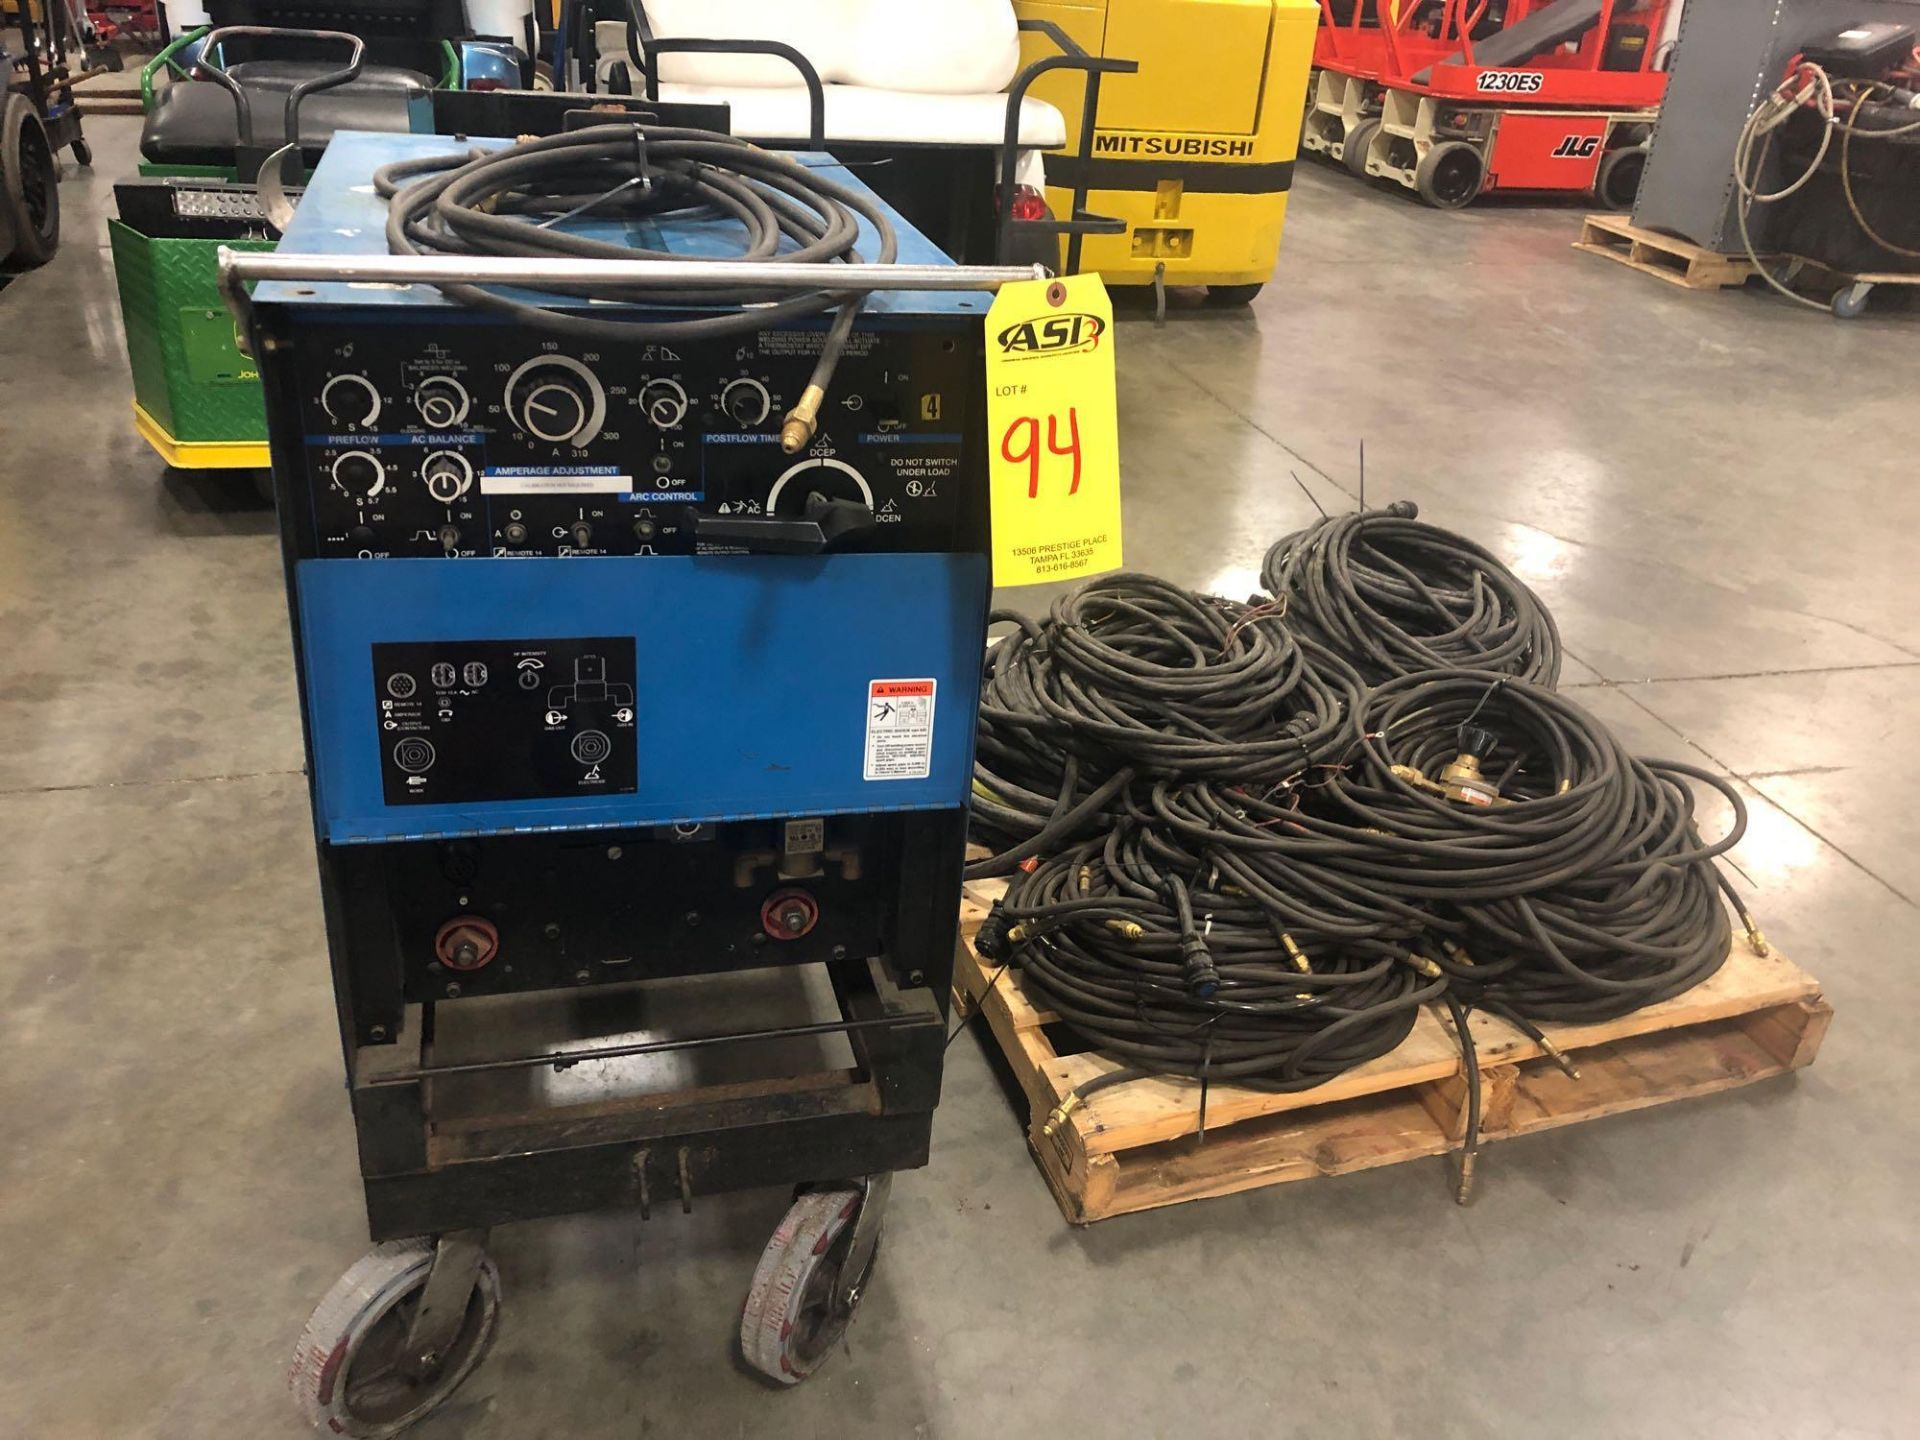 MILLER SYNCROWAVE 240 AC/DC WELDING POWER SOURCE WITH ASSORTED WELDING CABLES/LINES